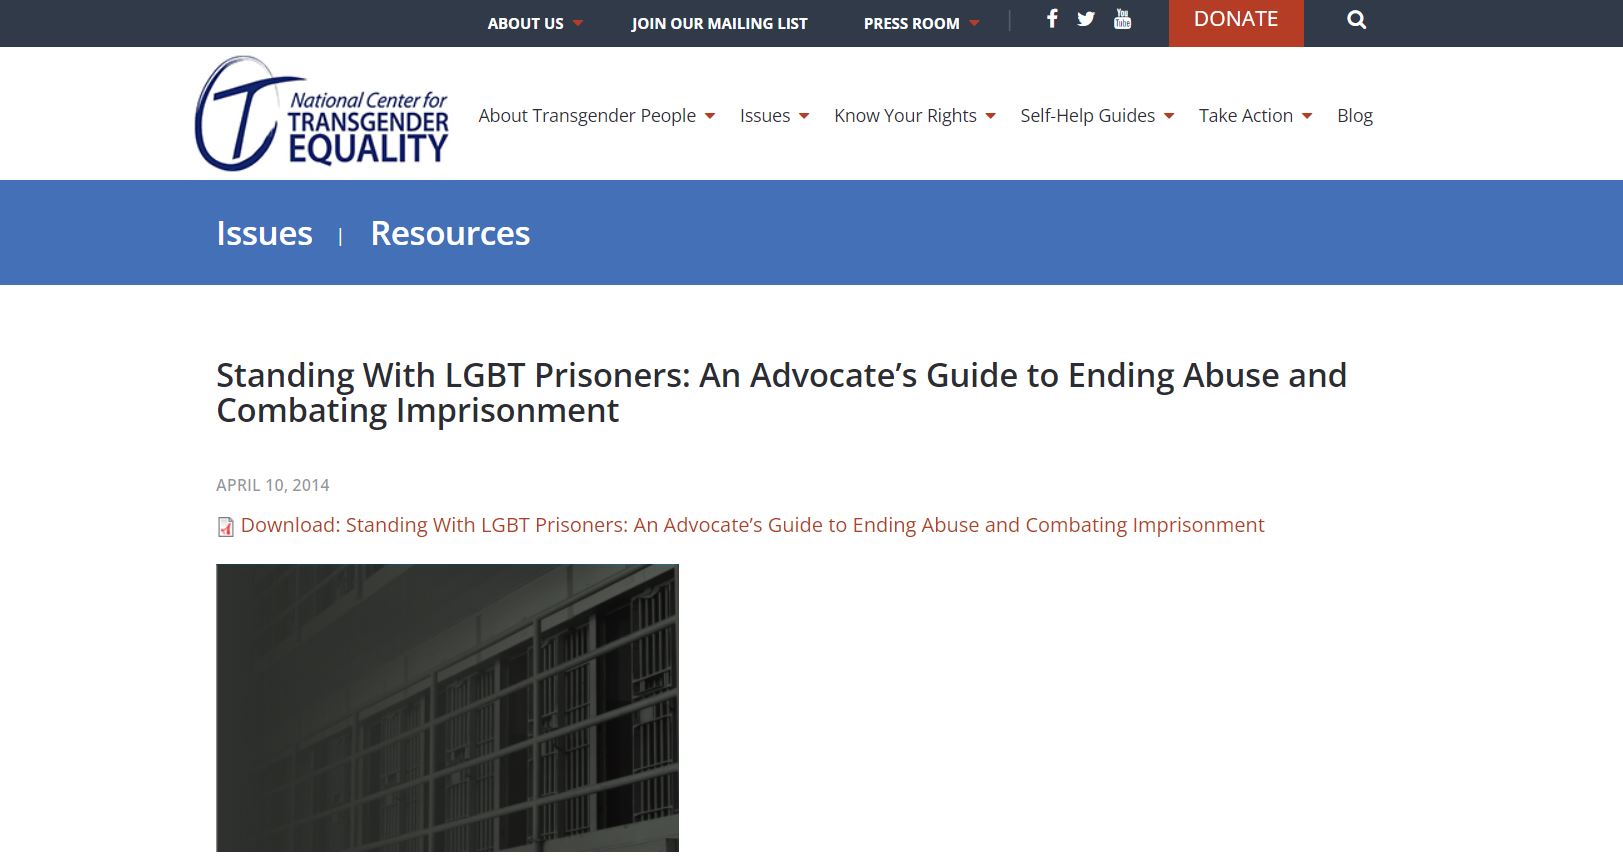 Standing with LGBT Prisoners: An Advocate's Guide to Ending Abuse and Combating Imprisonment